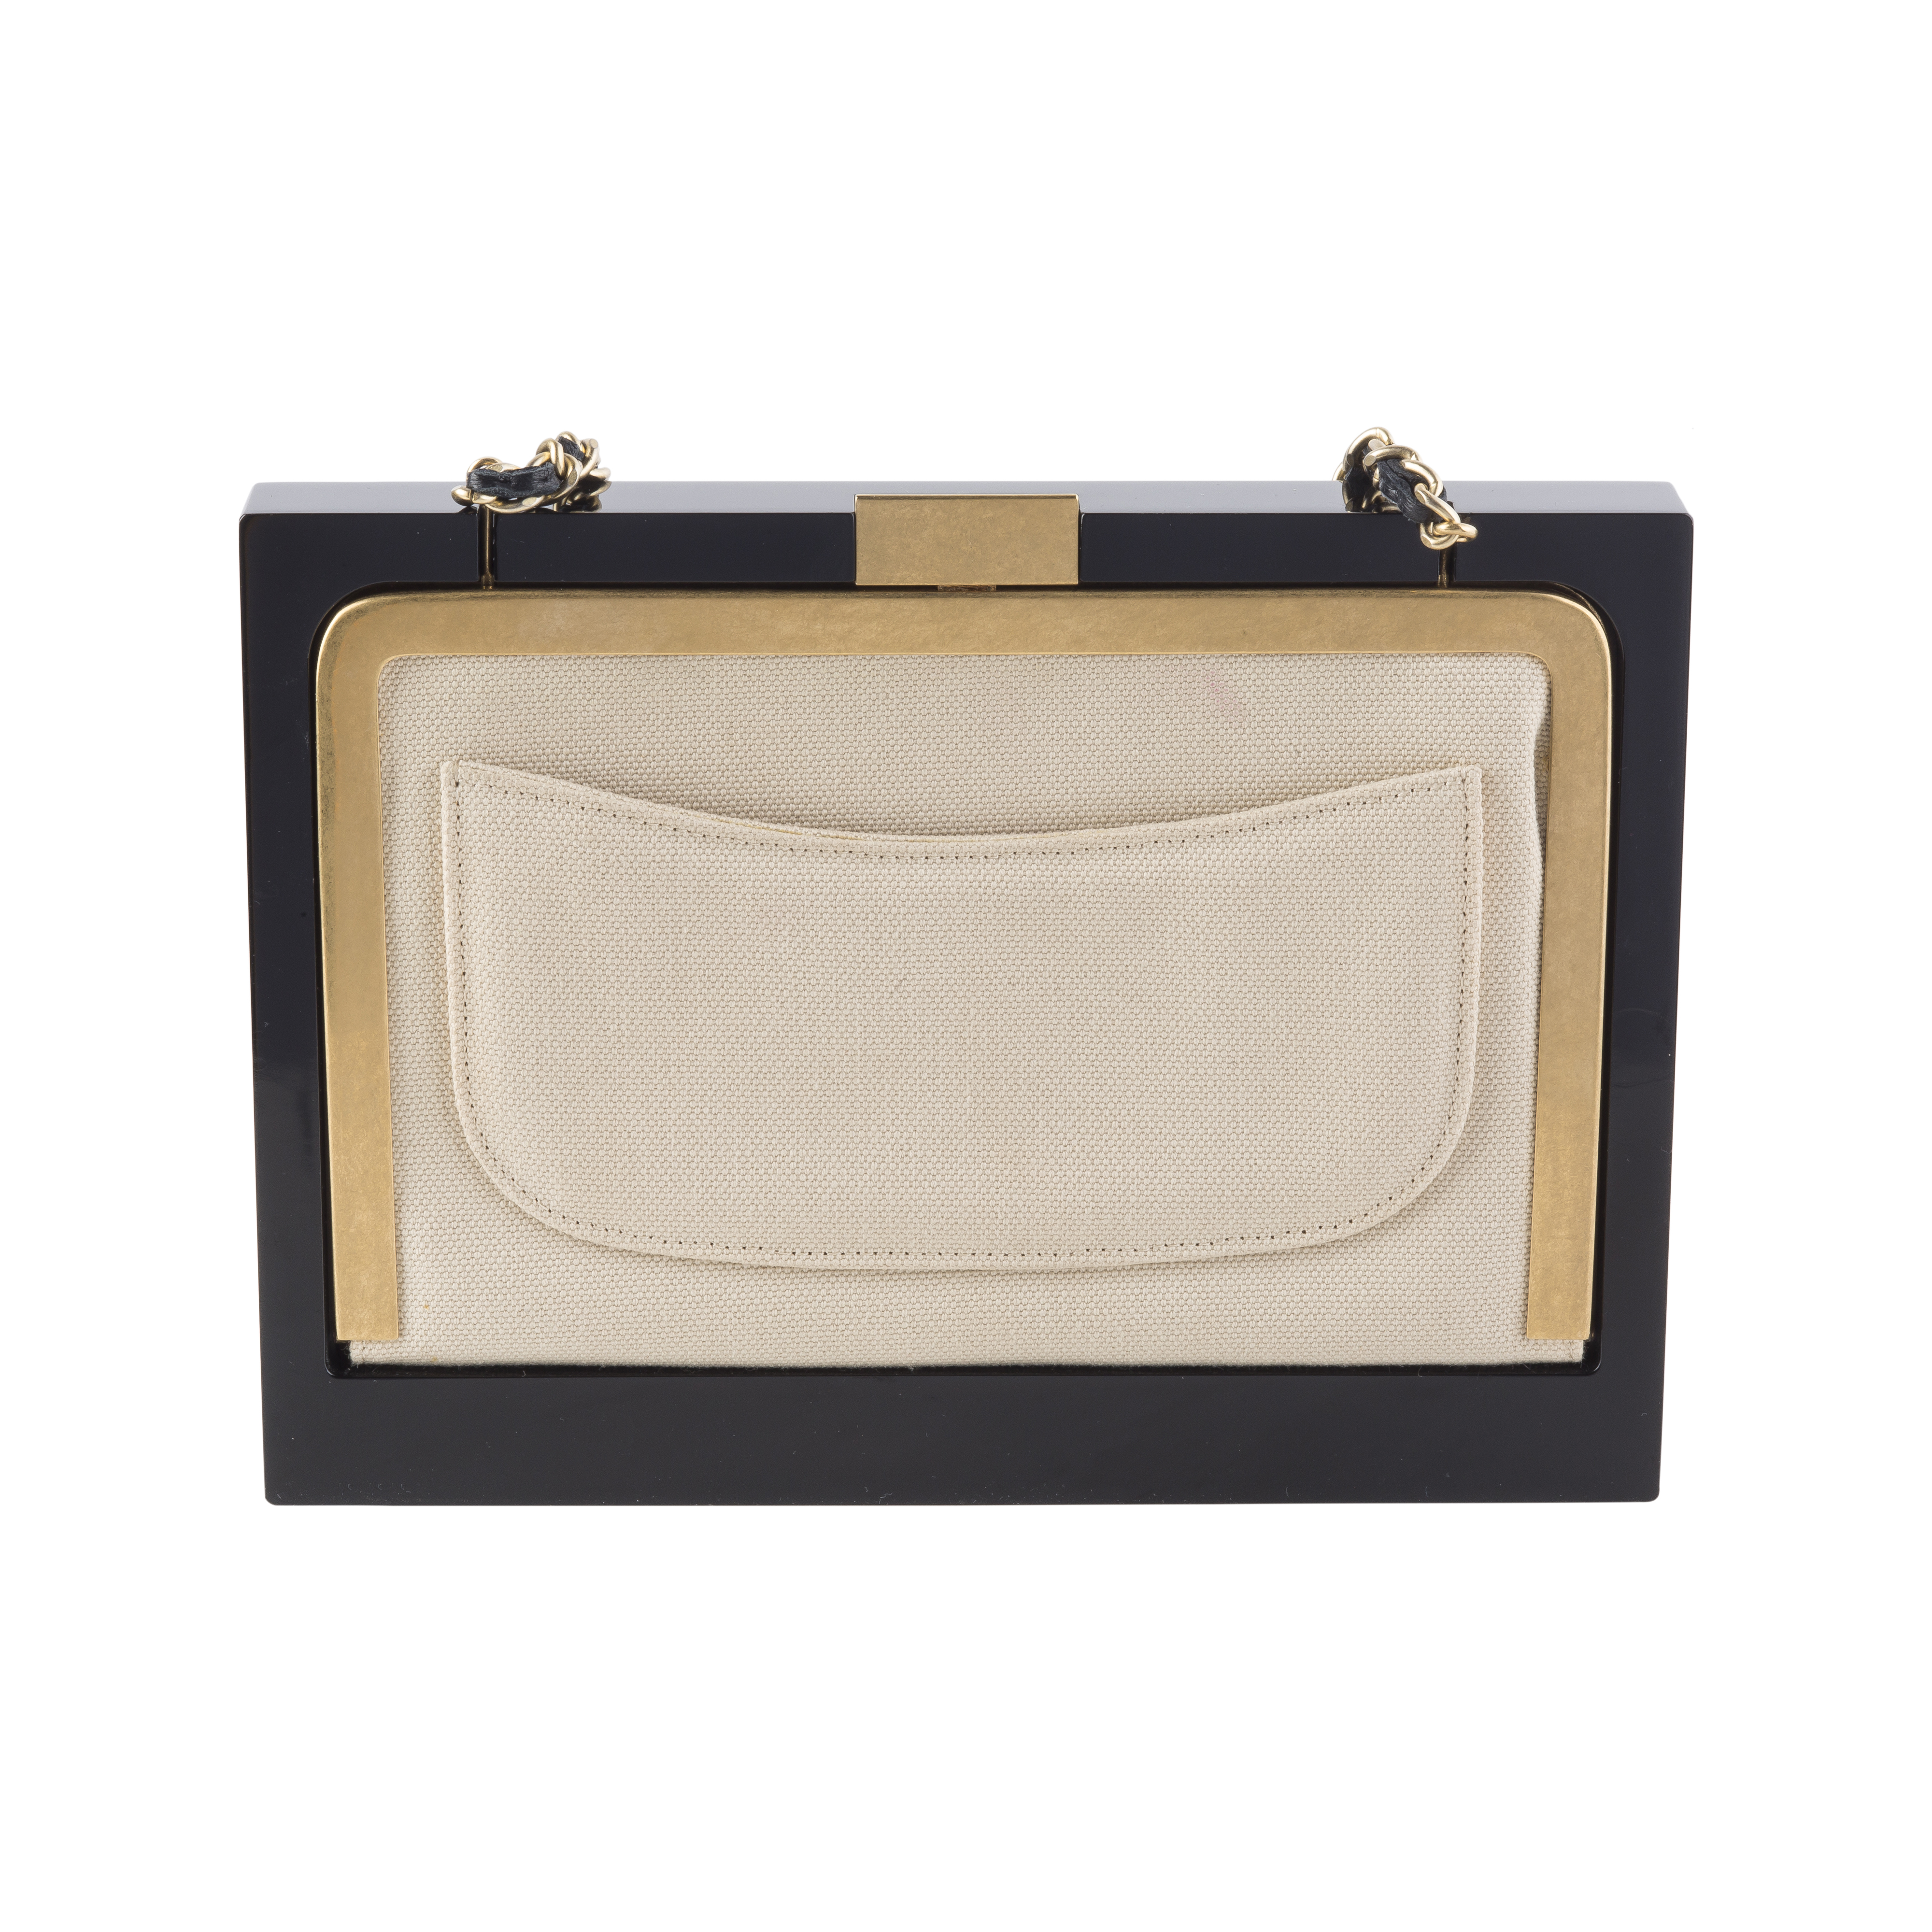 Chanel Lucite and Lambskin Frame Bag - Janet Mandell